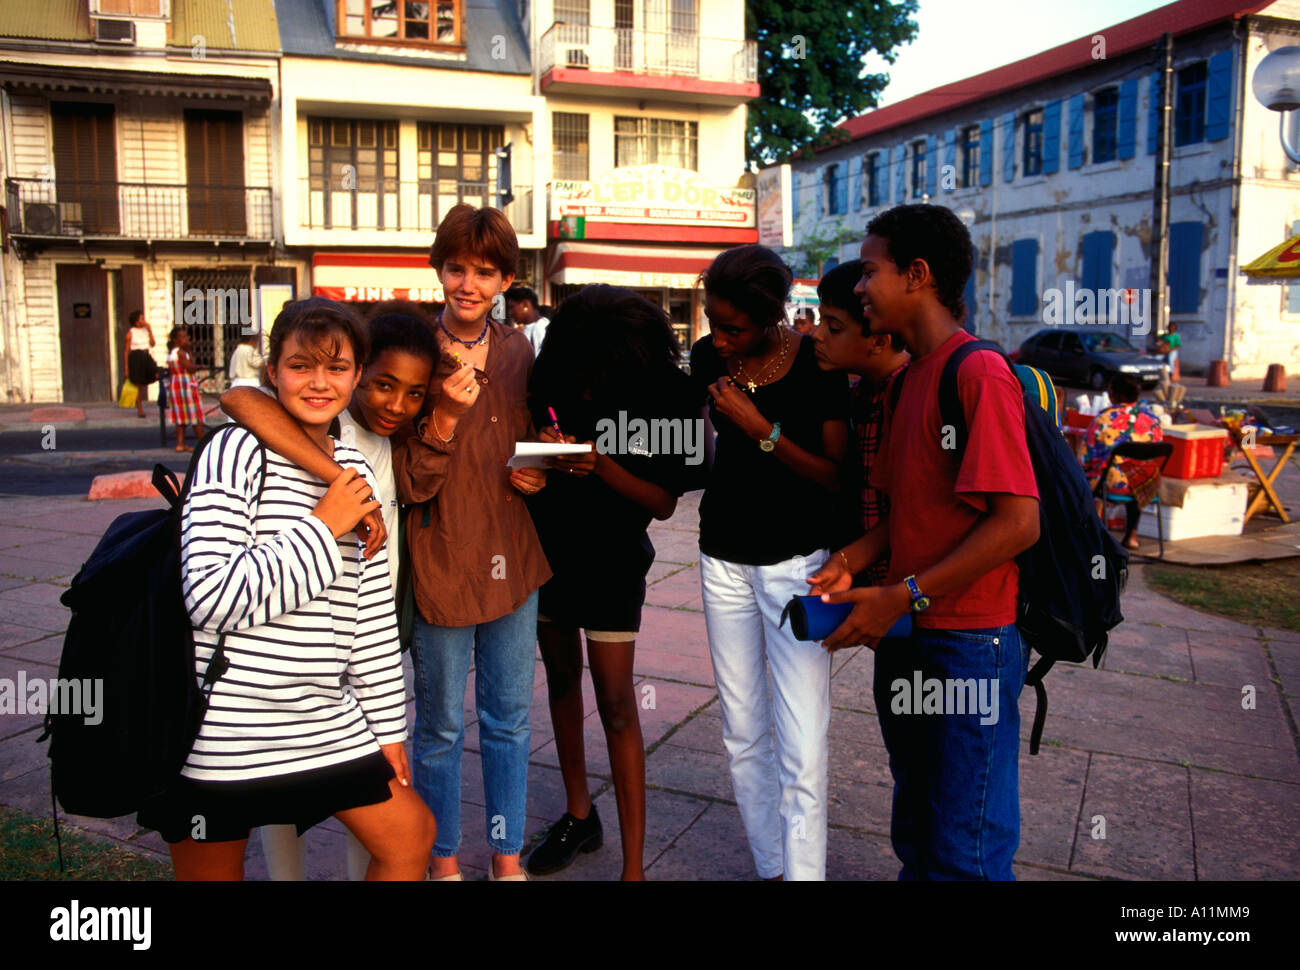 French students, students, teen girls, teen boys, teenagers, Pointe-a-Pitre, Grande-Terre, Guadeloupe, France, French West Indies Stock Photo